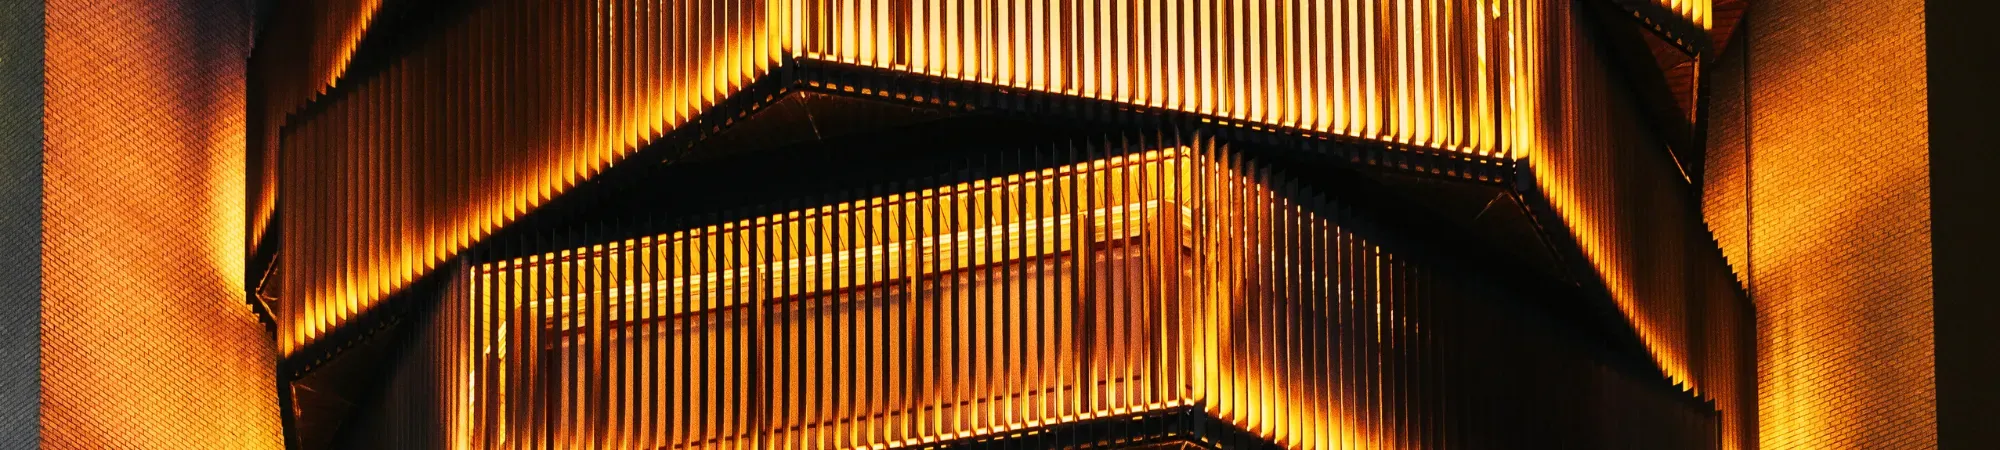 A bright orange building with vertical slats